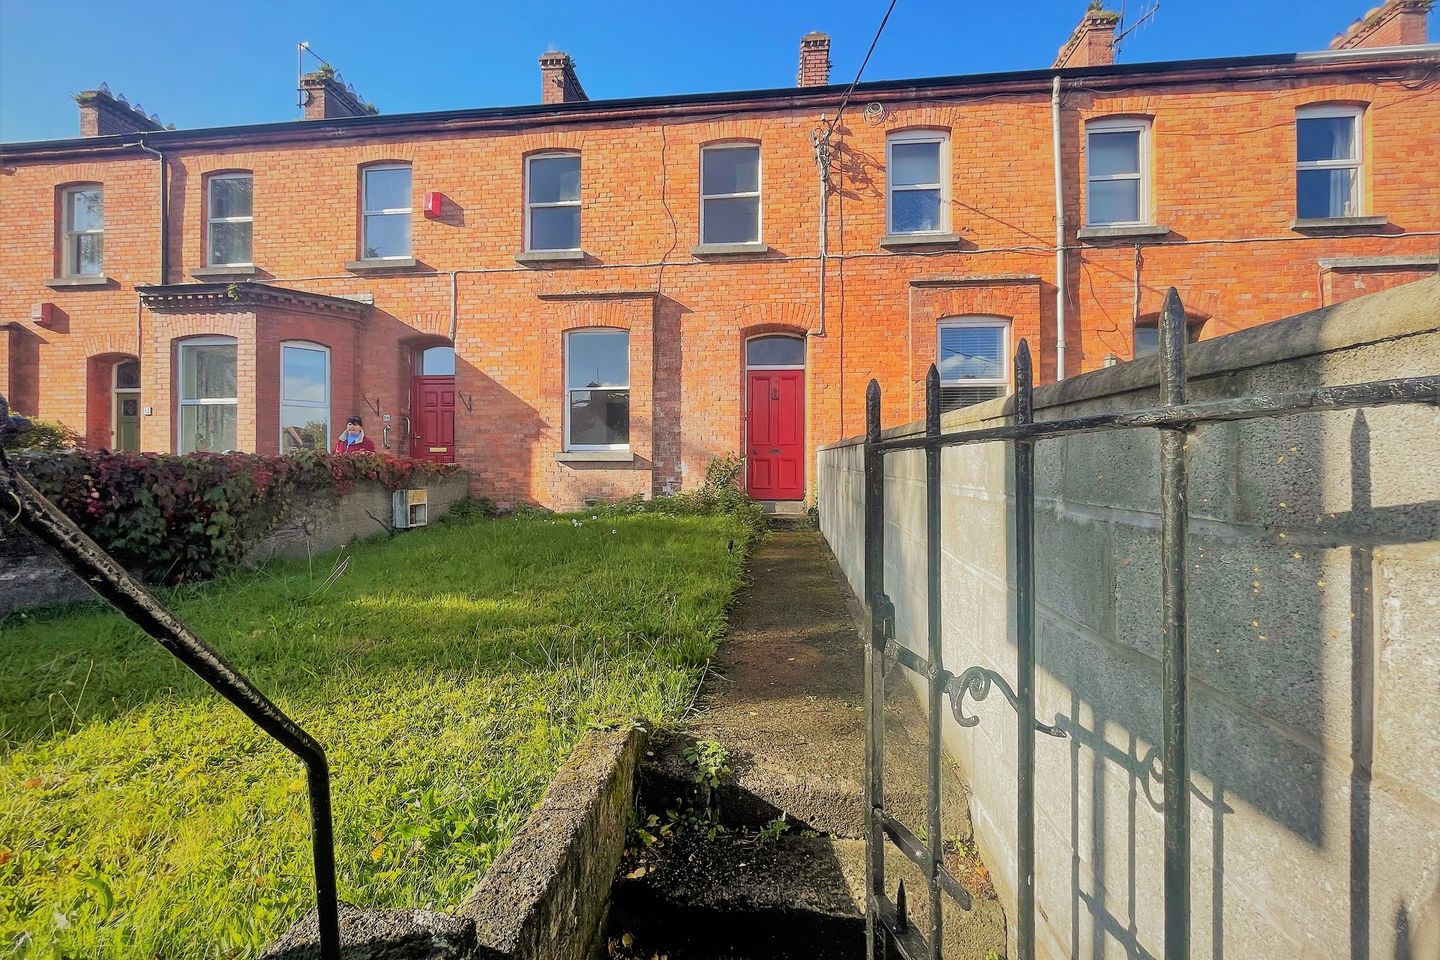 17 County View Terrace, Ballinacurra Road, South Circular Road, Co. Limerick